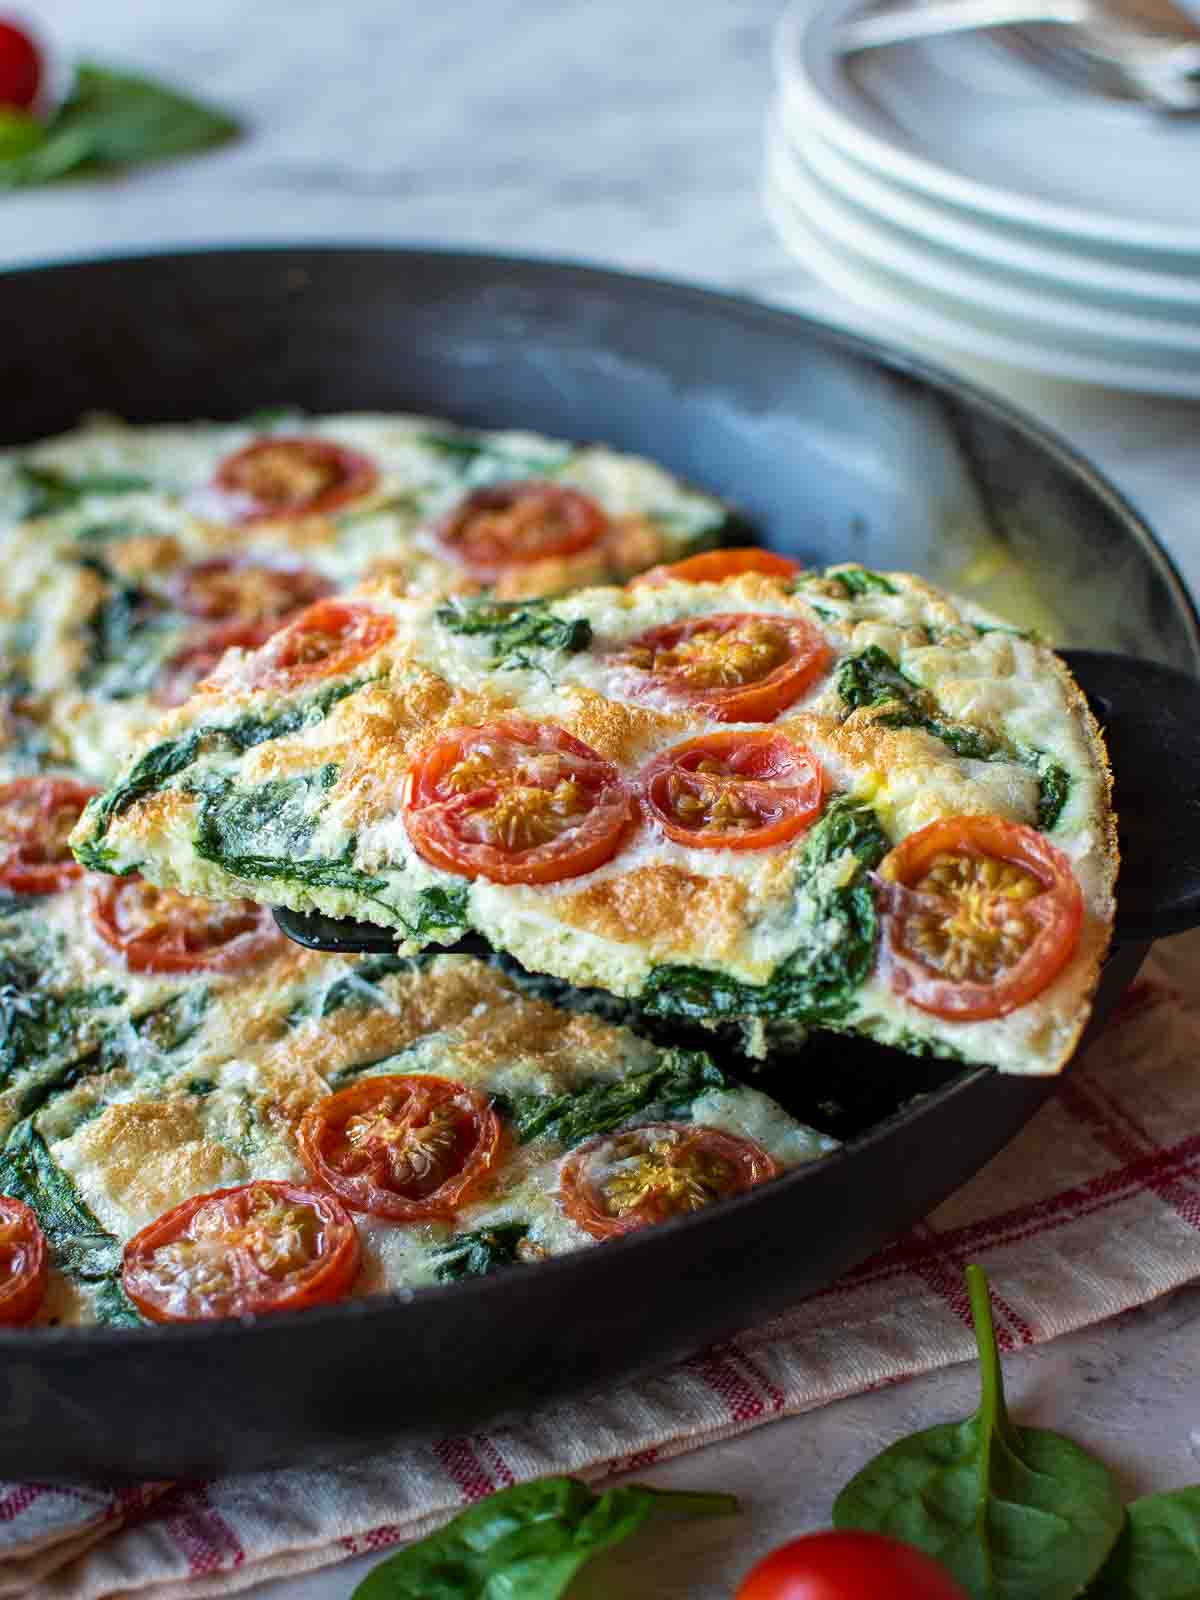 A slice of the egg white frittata being lifted out of the pan.